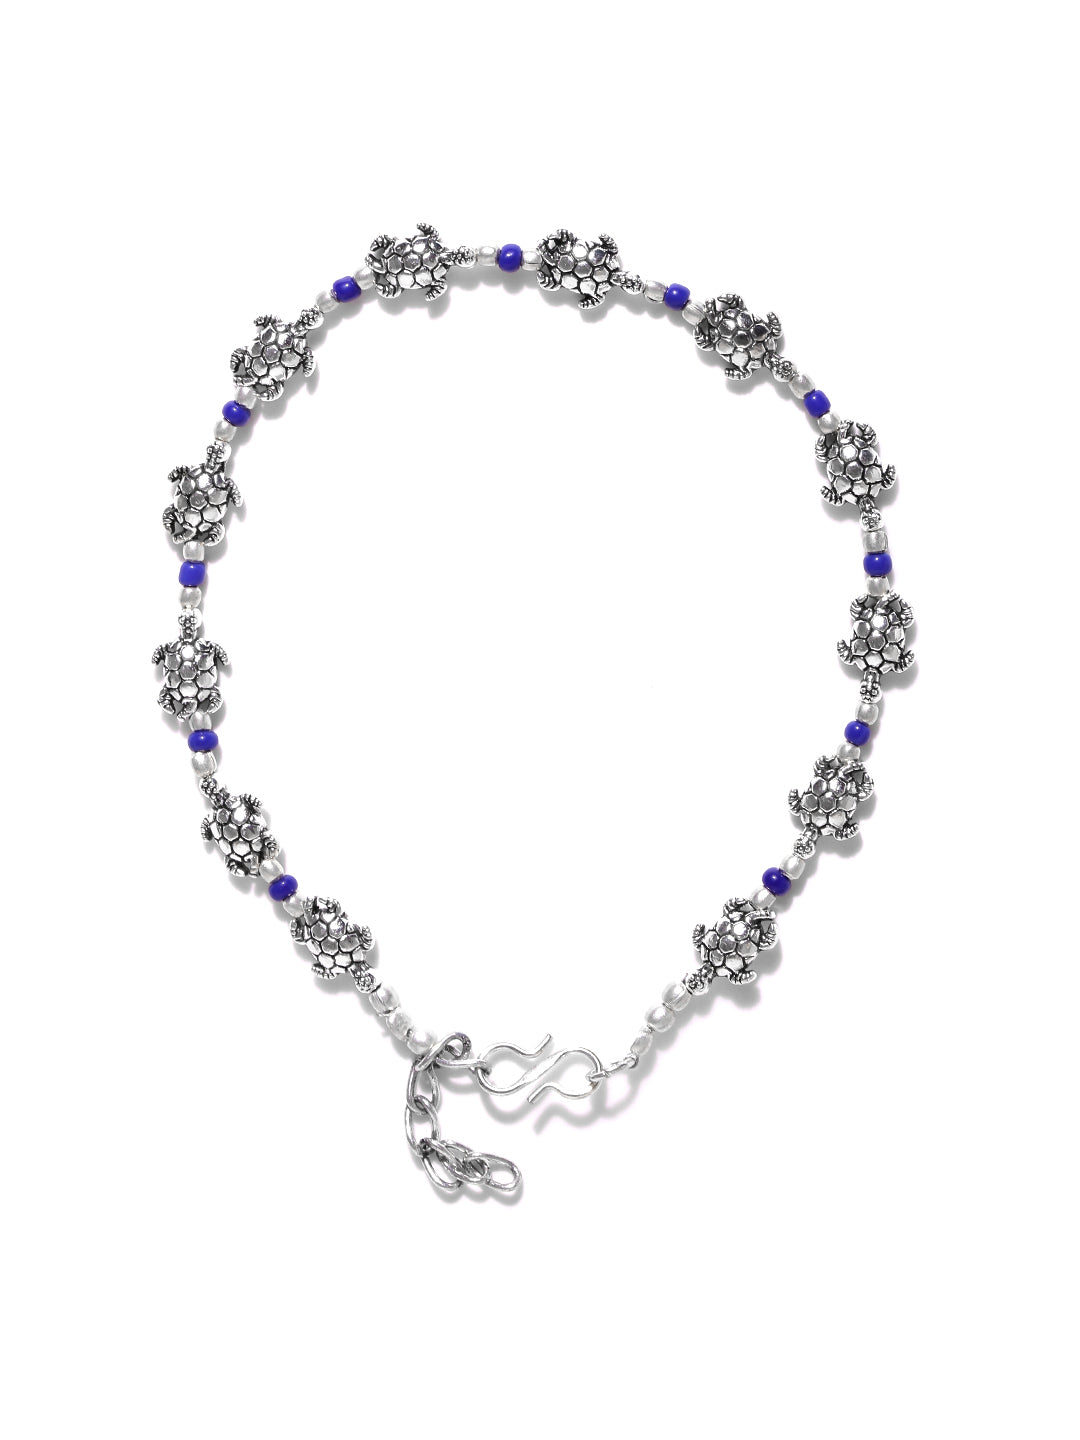 German Silver/Oxidized Tortoise Design With Blue Beads Set Of 2 Anklet/Payal